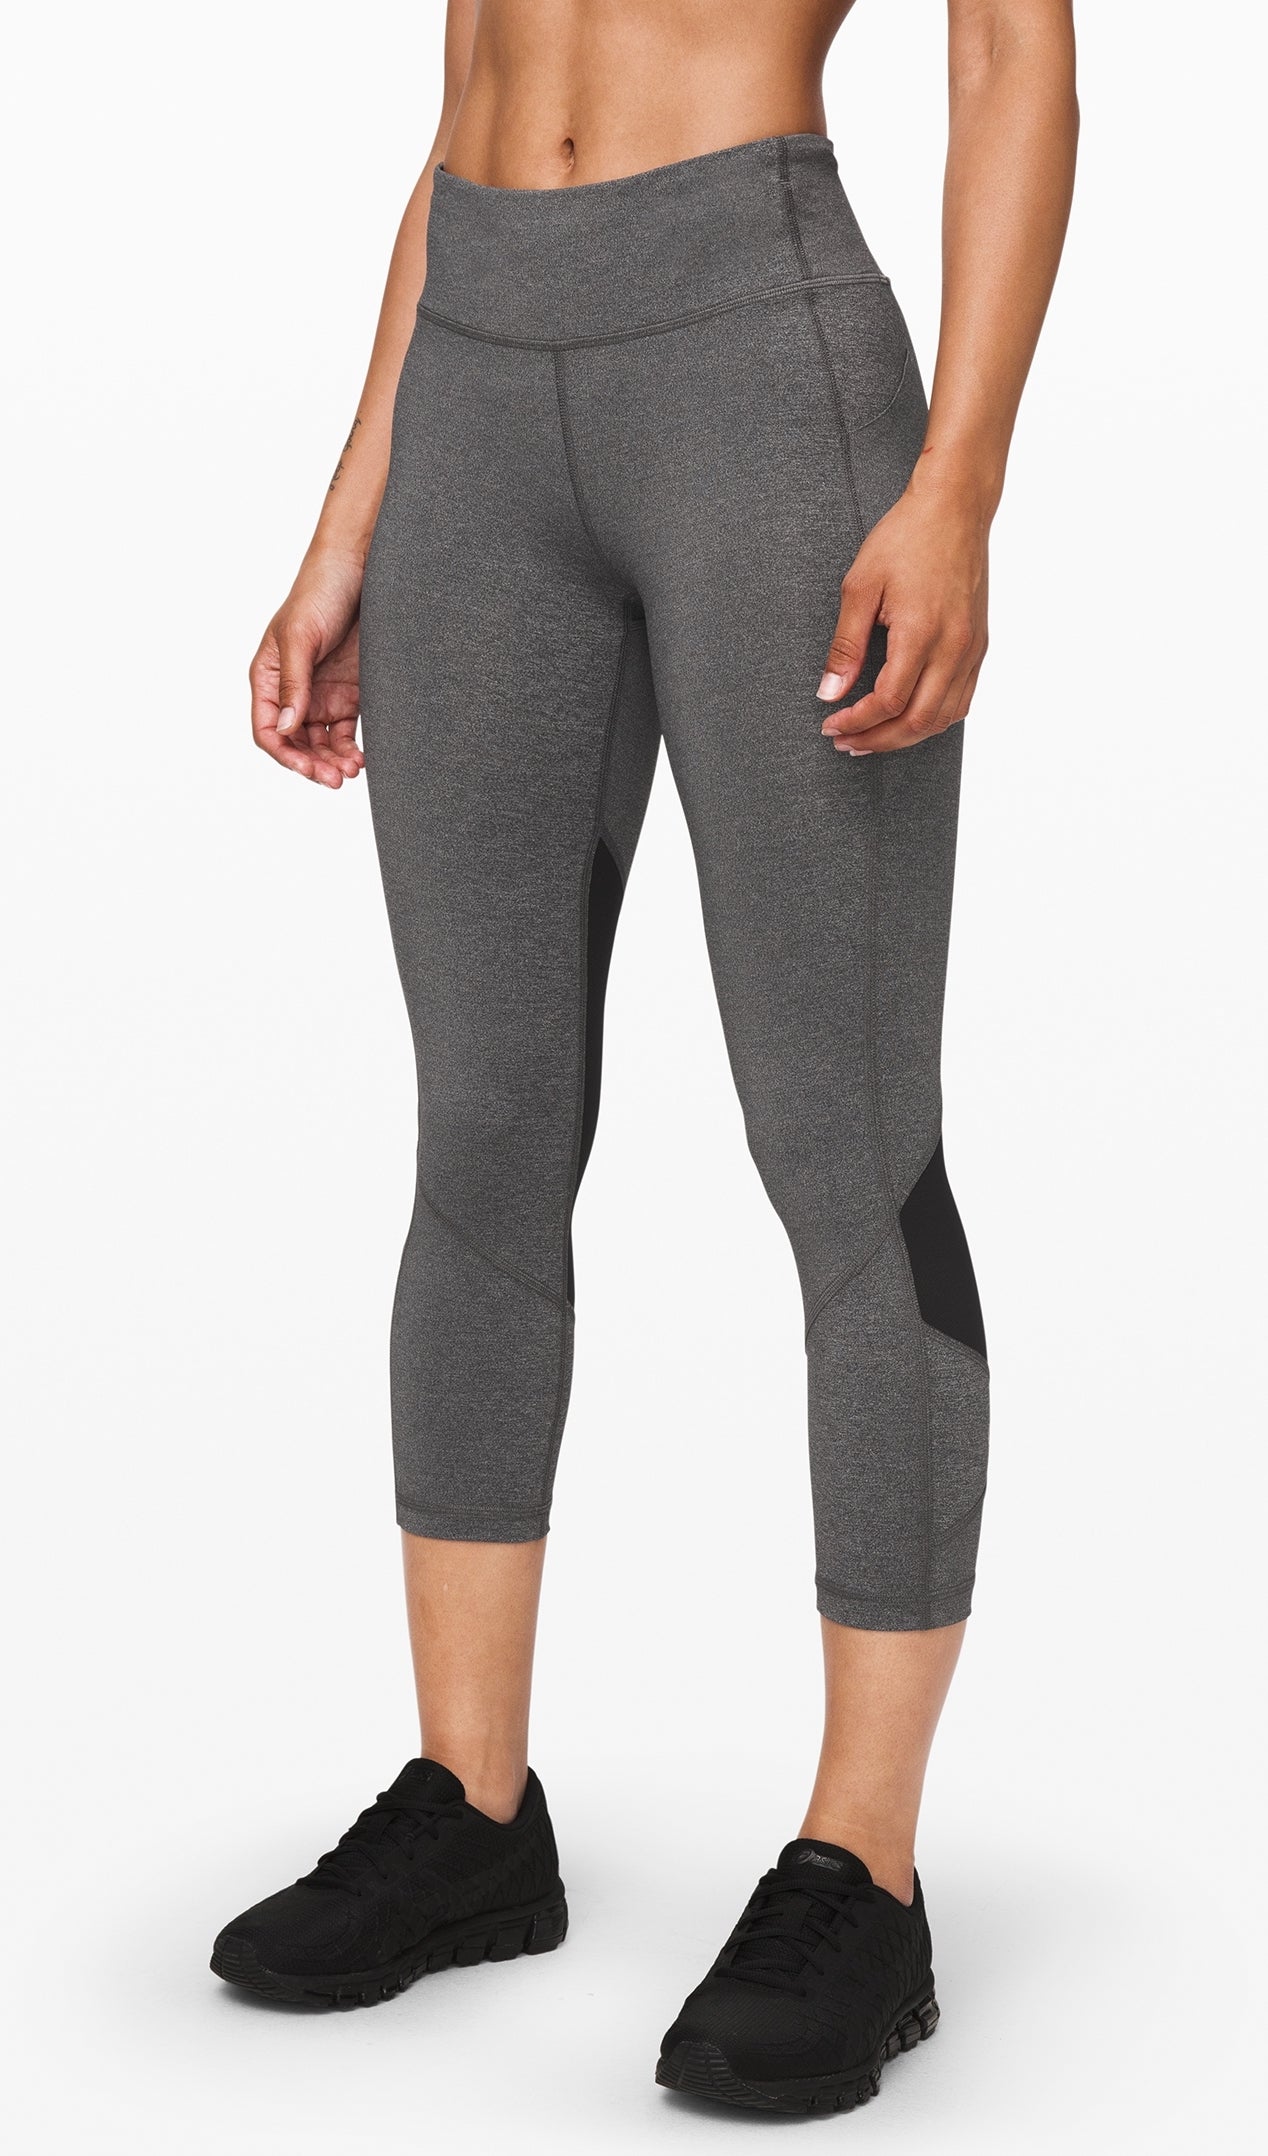 Shop The Best Pieces In The lululemon Sale